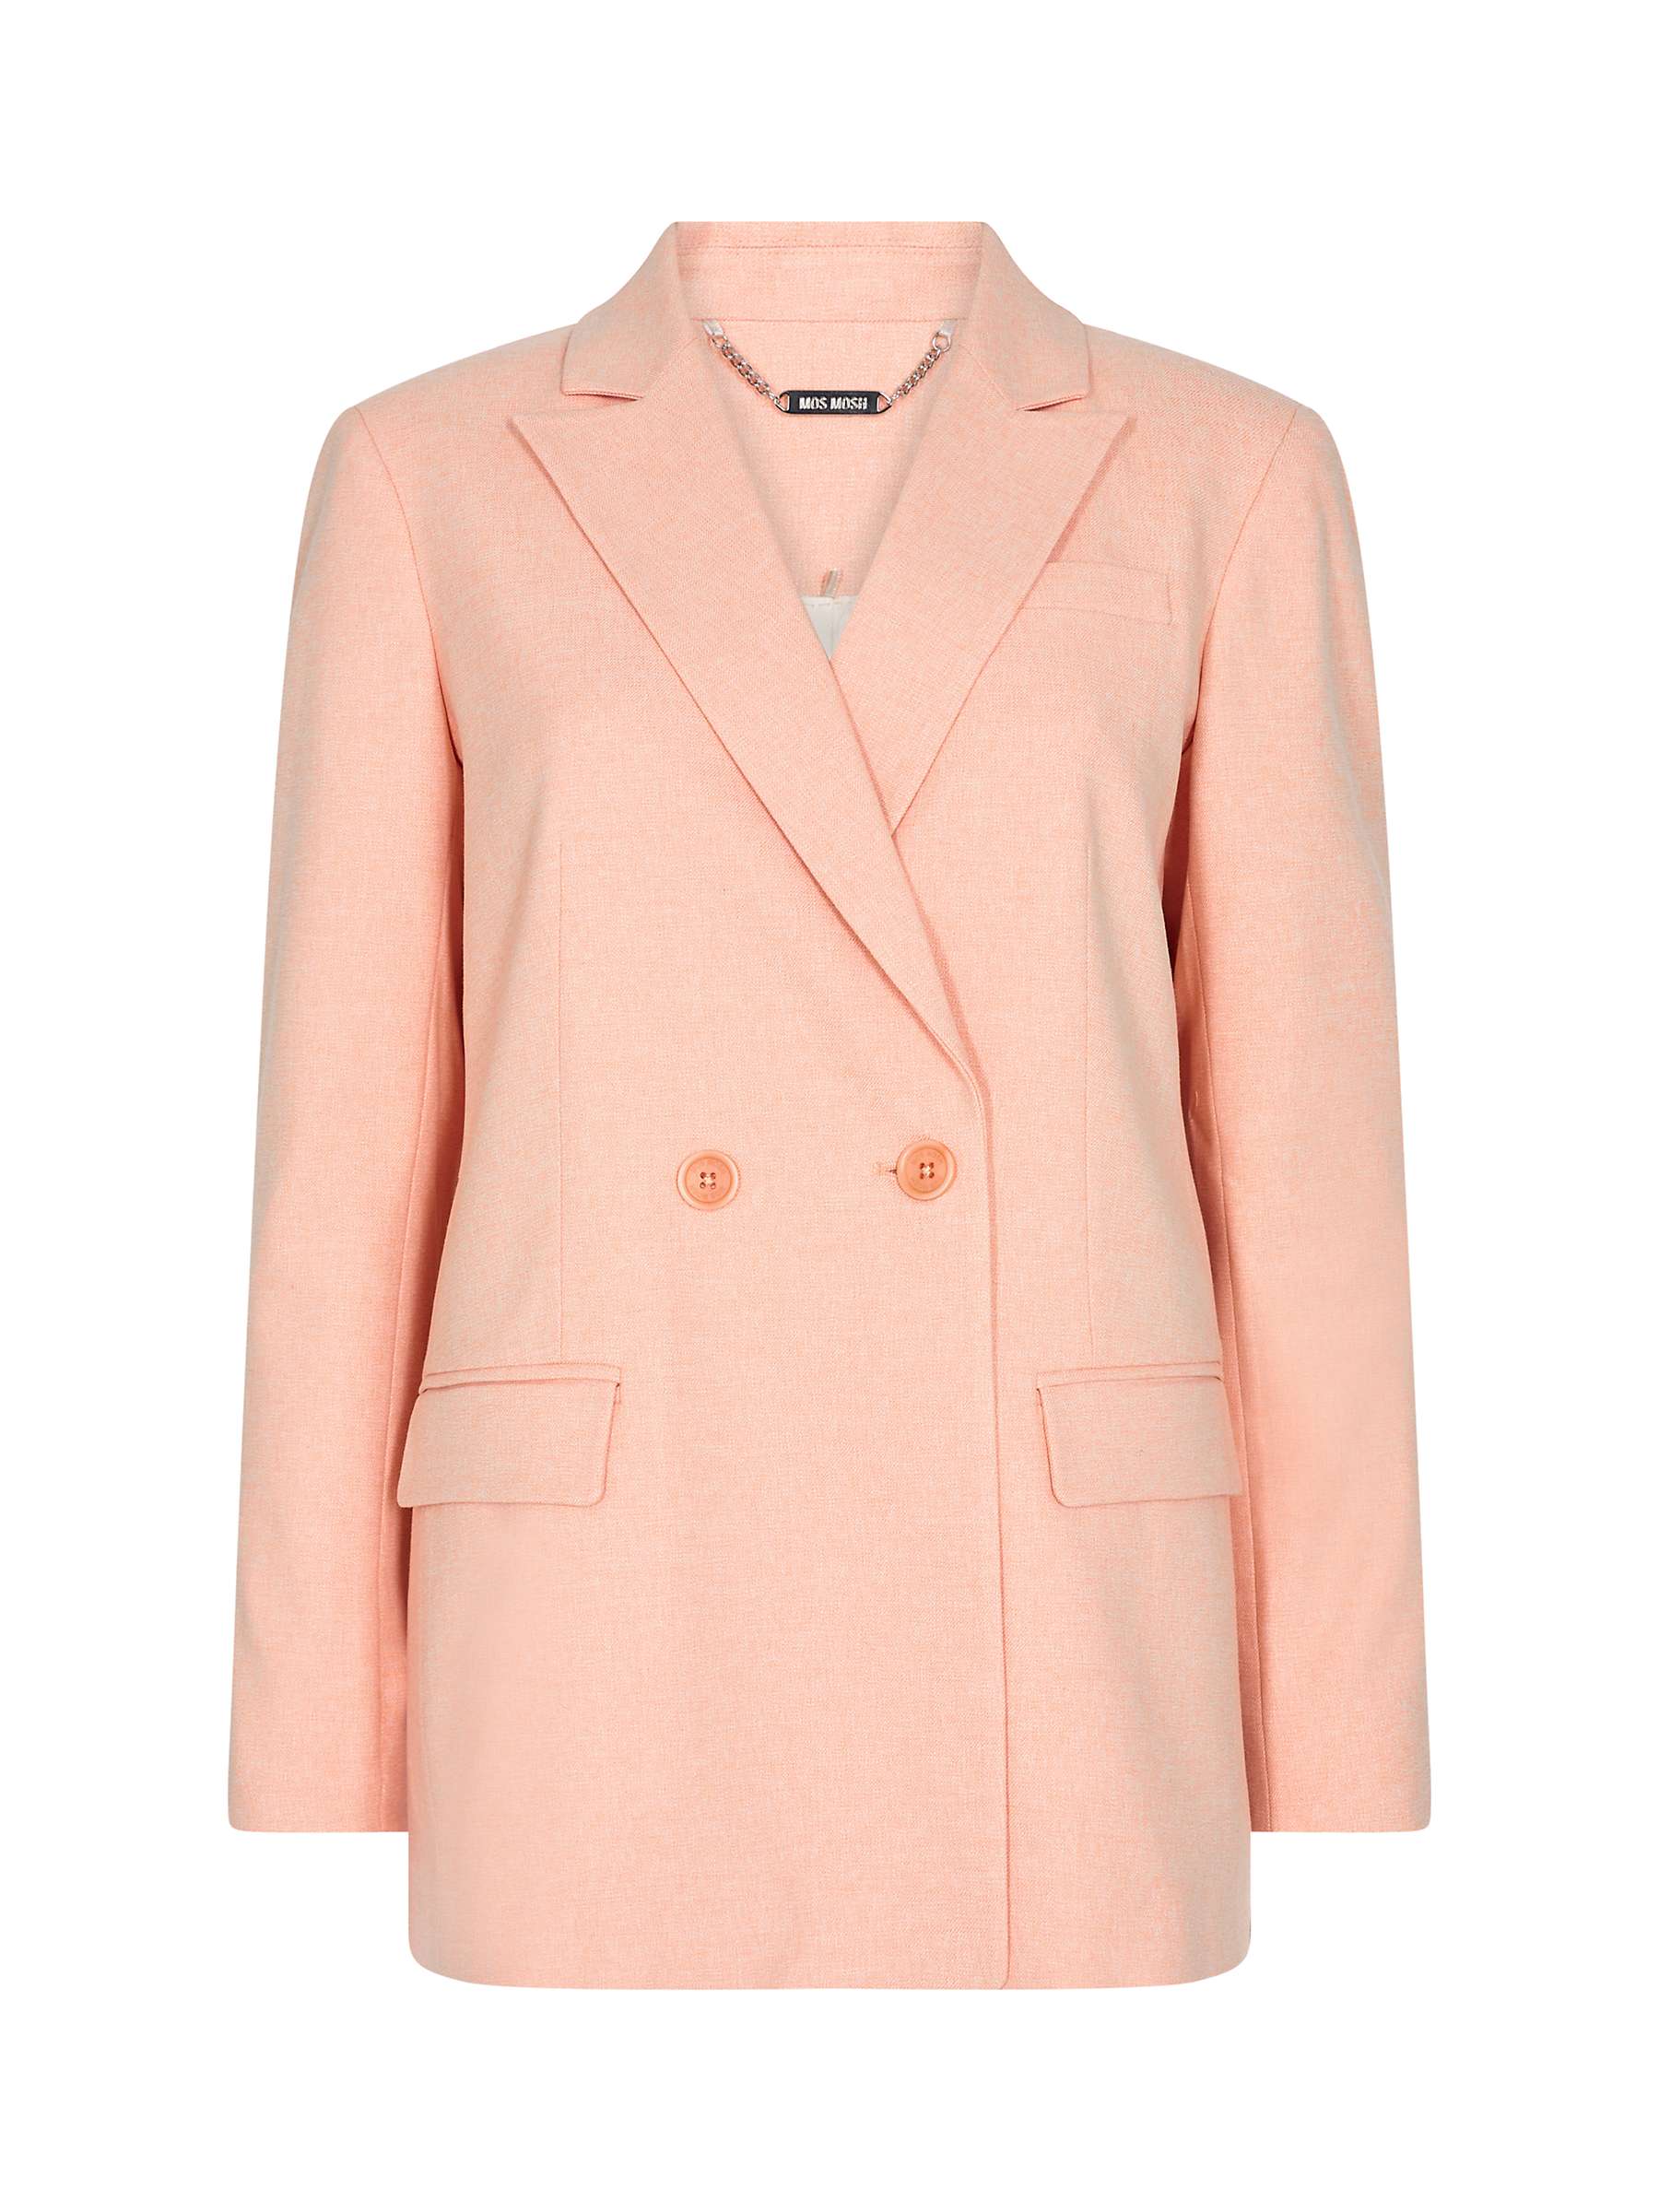 Buy MOS MOSH Wanda Twiggy Double Breasted Blazer, Coral Reef Online at johnlewis.com